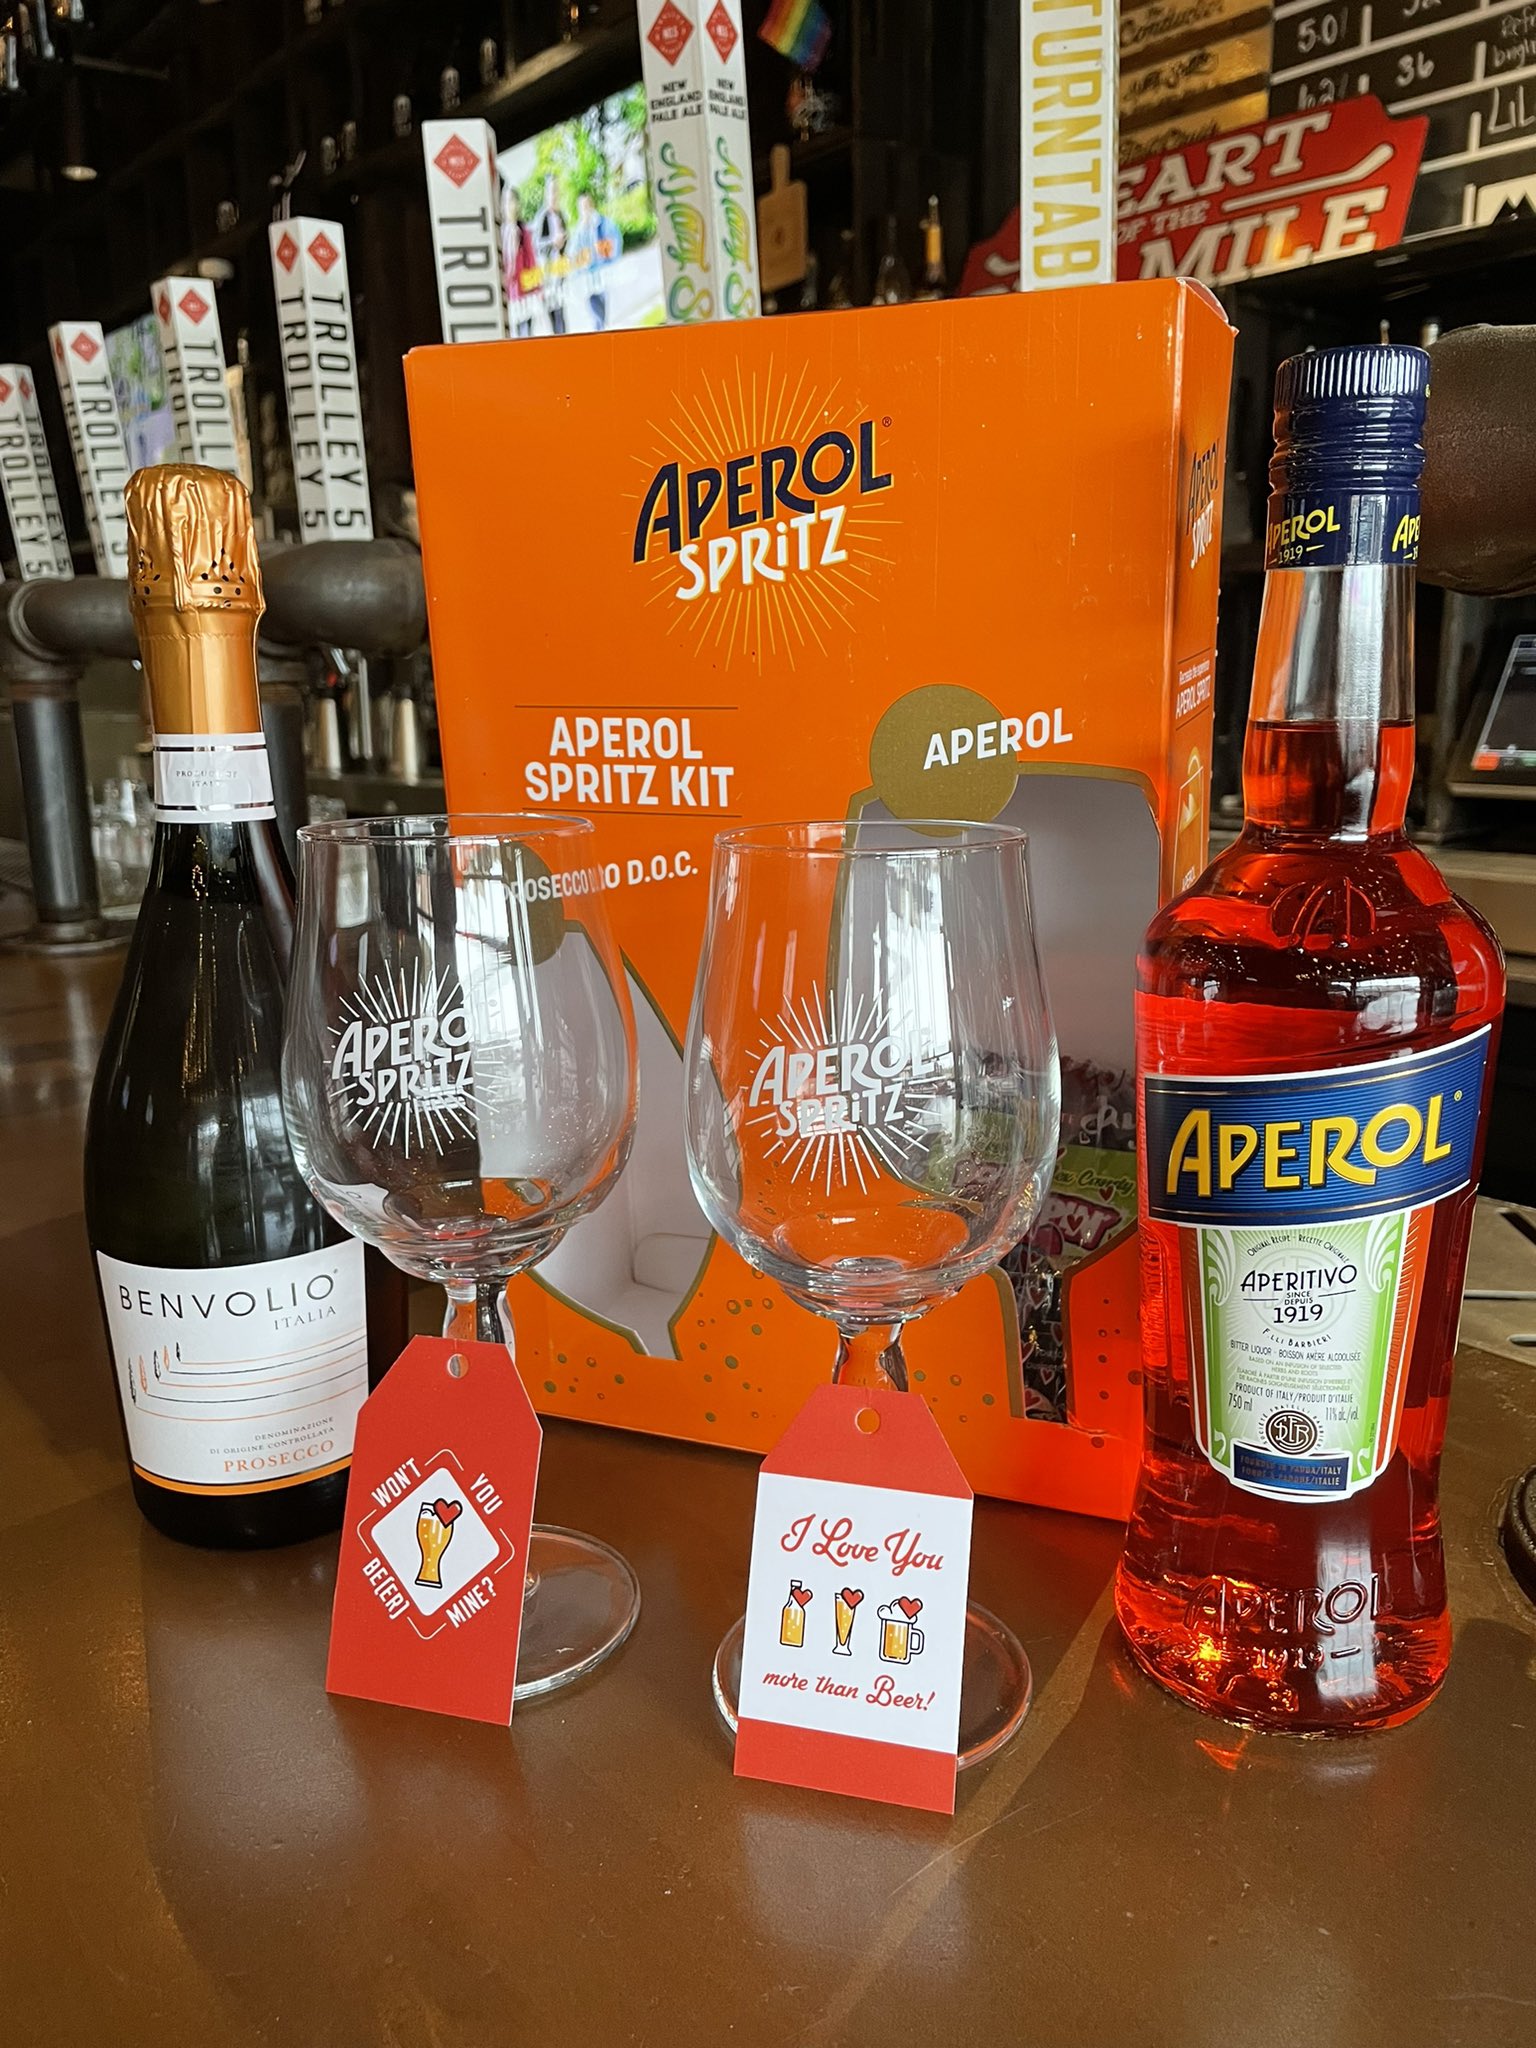 Trolley 5 Brewpub on X: Looking for a last minute gift idea? We've got you  covered! Head to our website to purchase an Aperol Spritz package available  for pick up. Ft. A